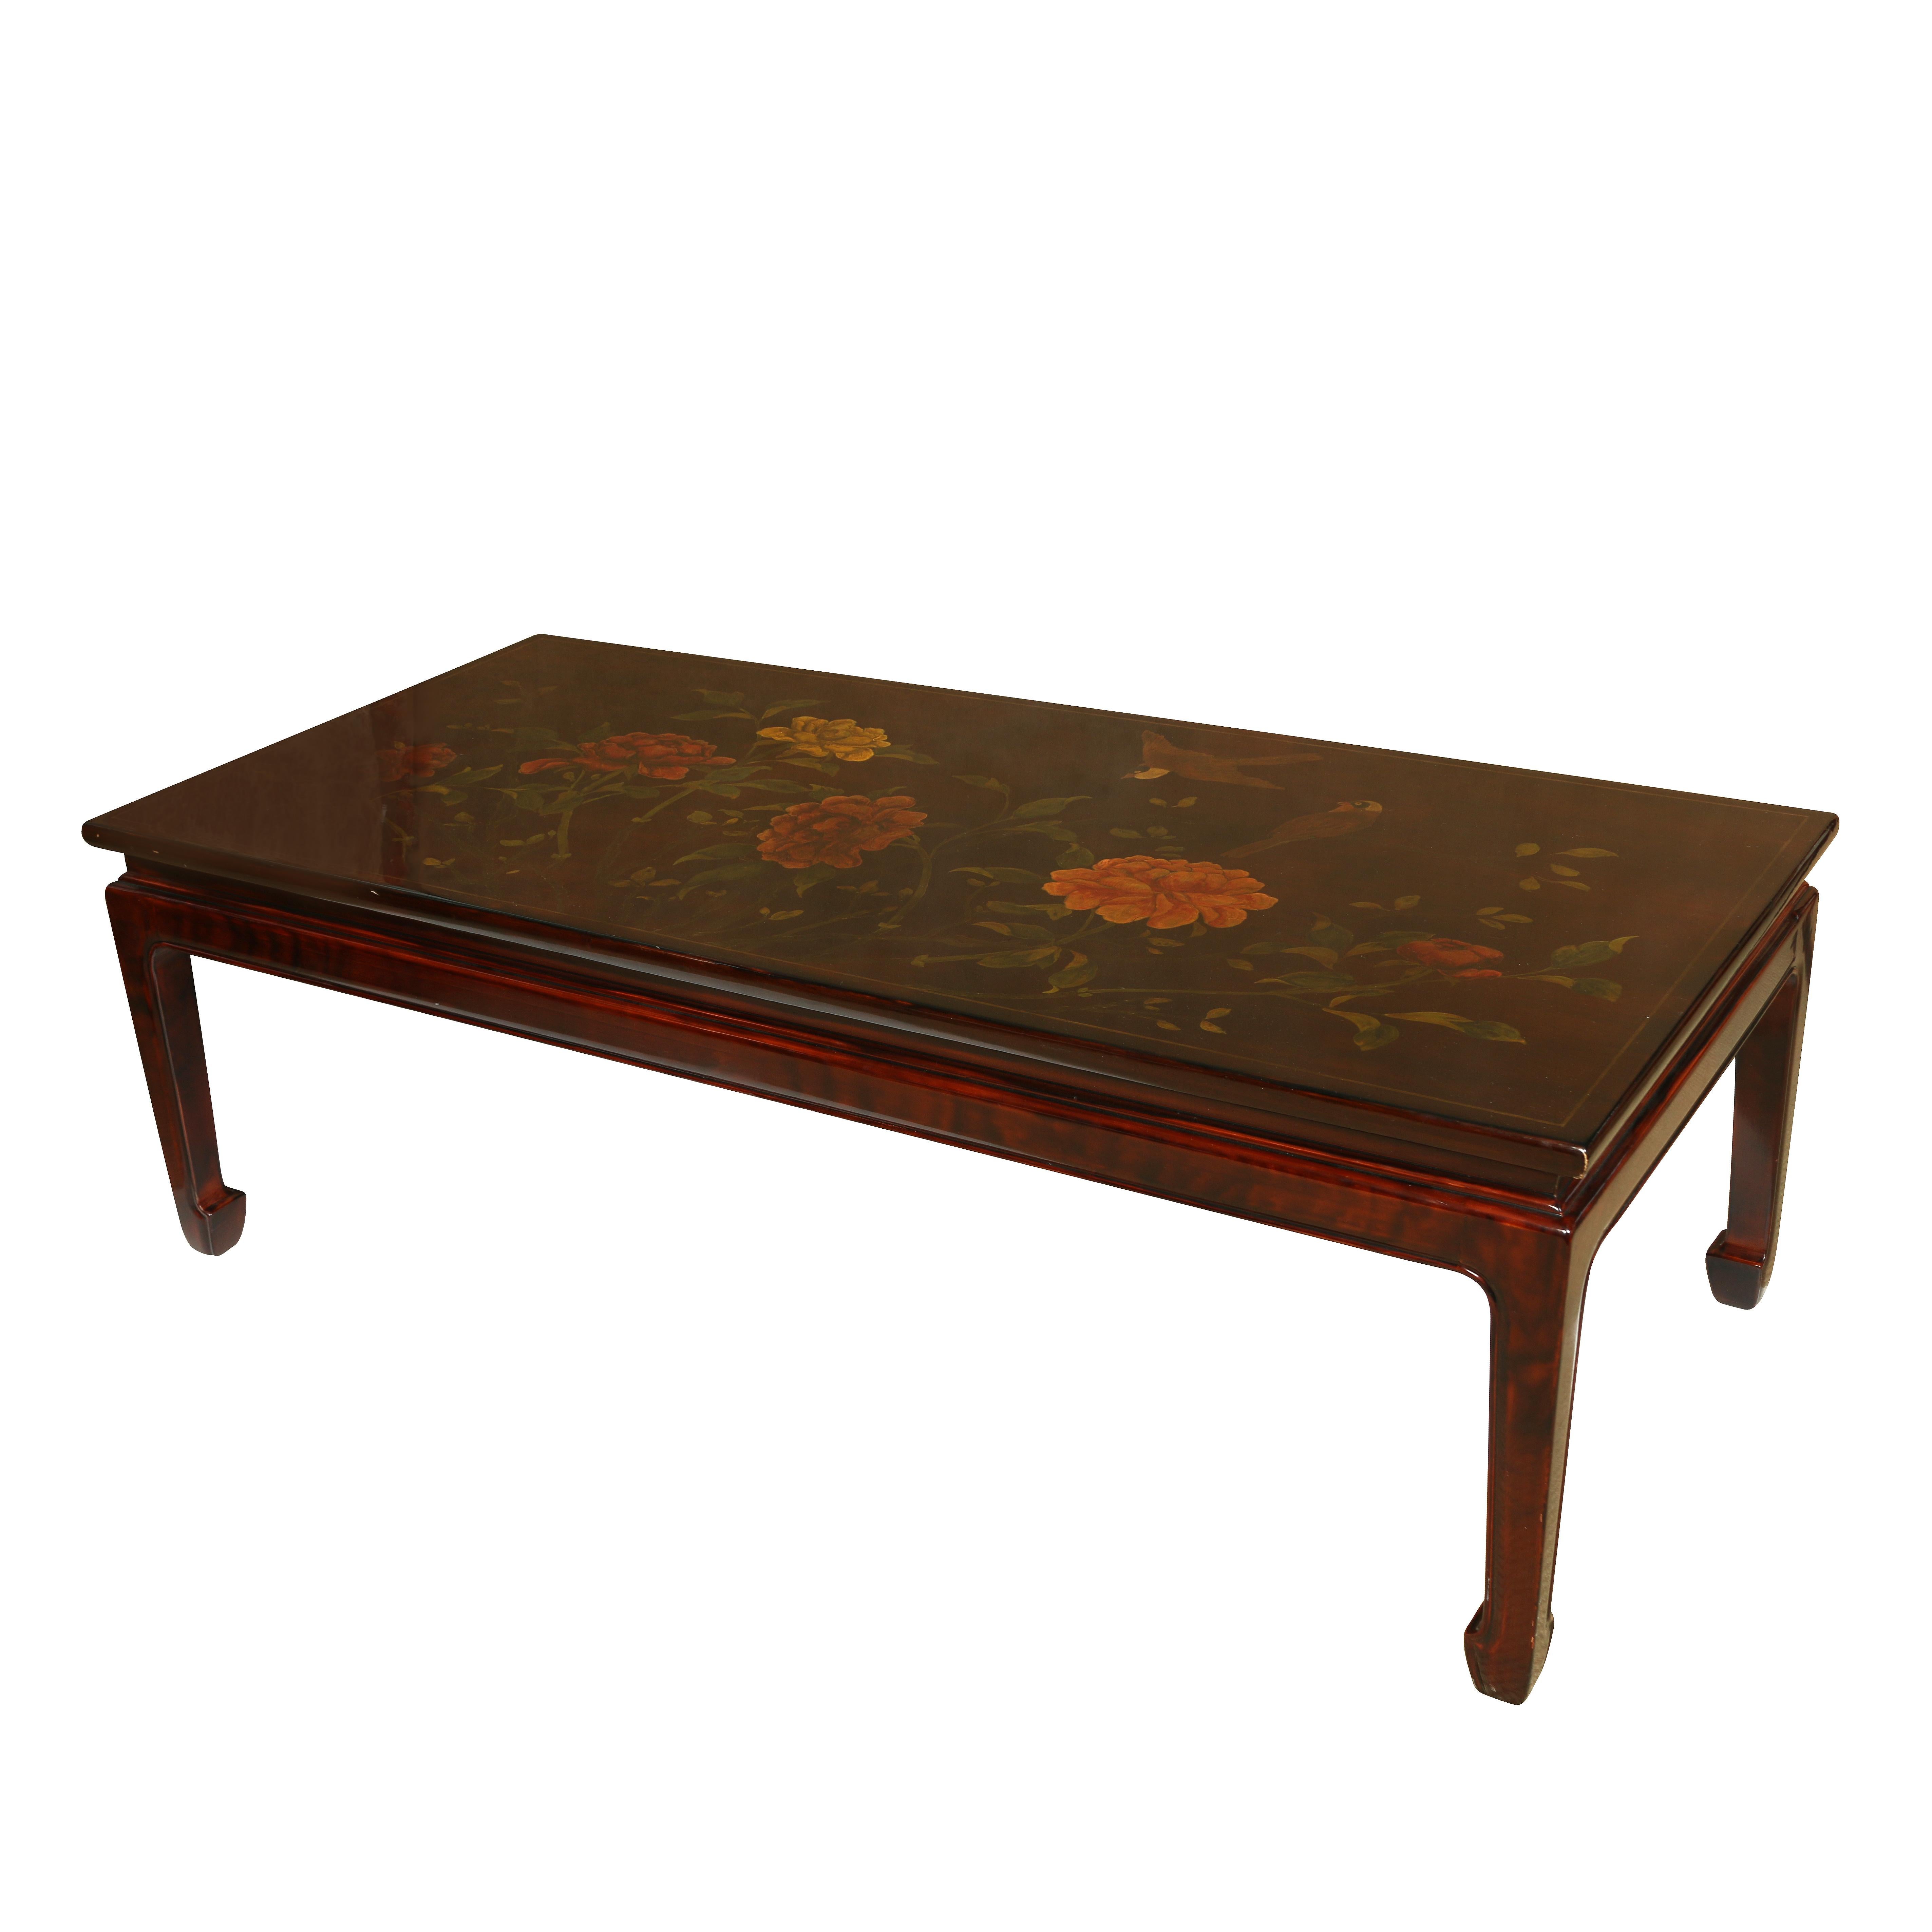 GRACIE Chinese style coffee table with floral and bird decoration.